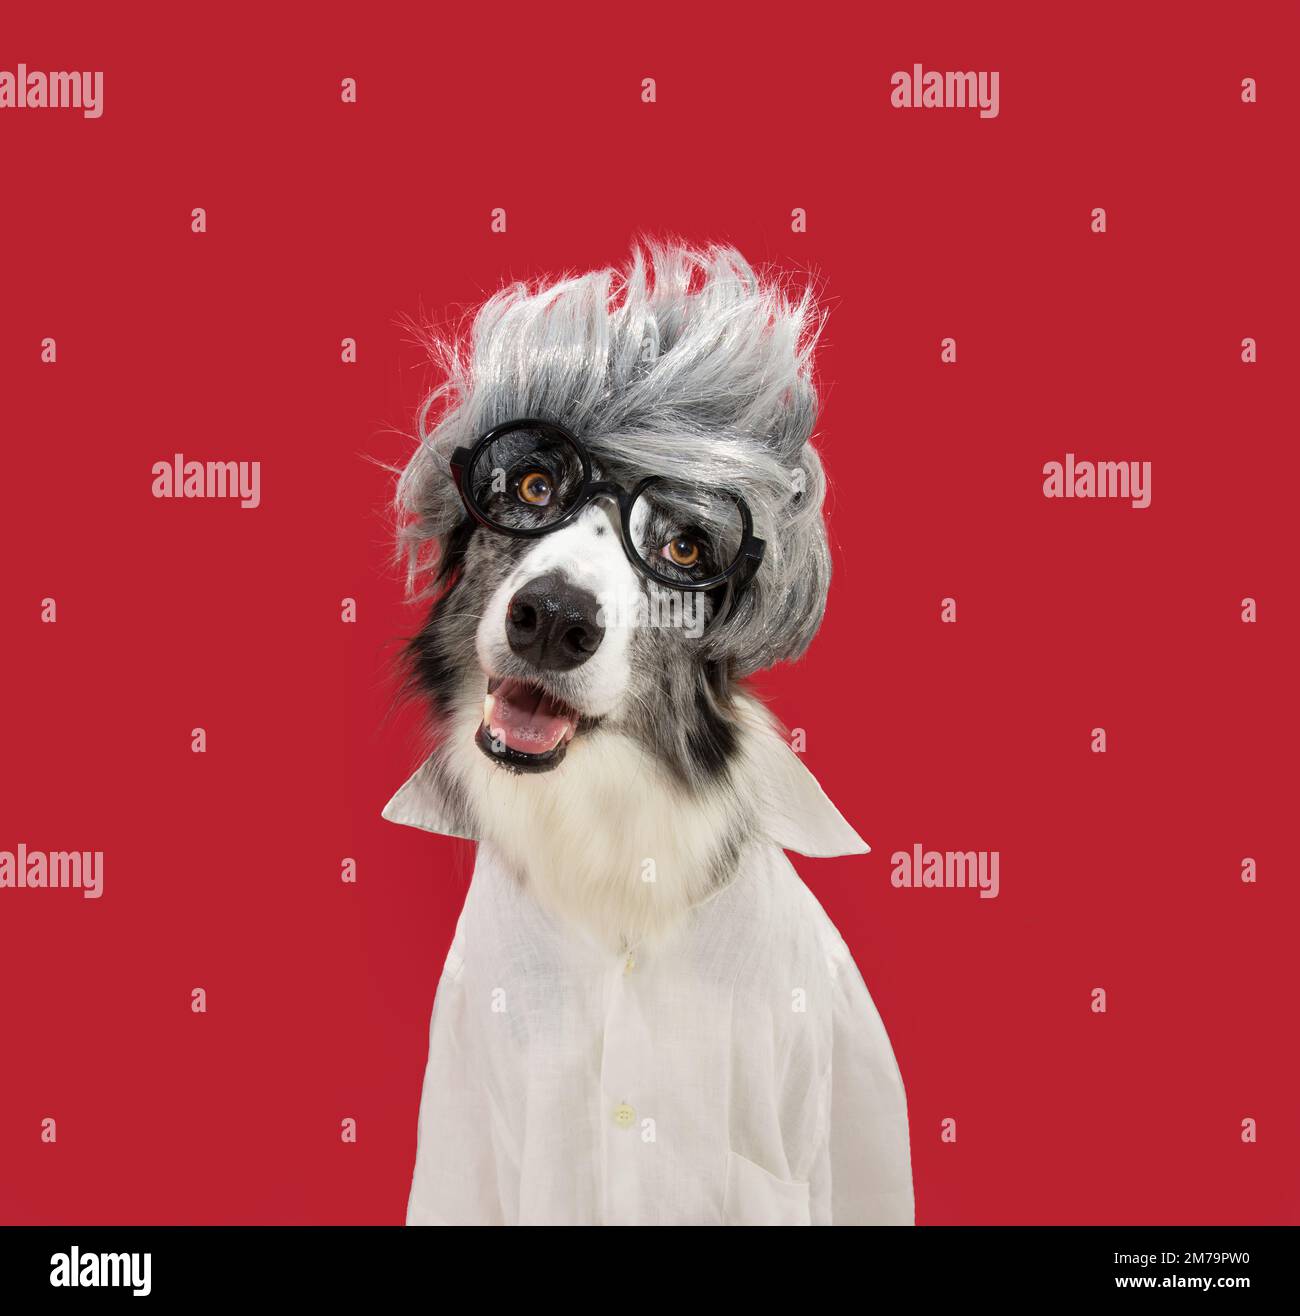 Funny border collie dog celebrating carnival, halloween or new year dressed as a wig, glasses and shirt. Isolated on red magenta background. Albert Ei Stock Photo